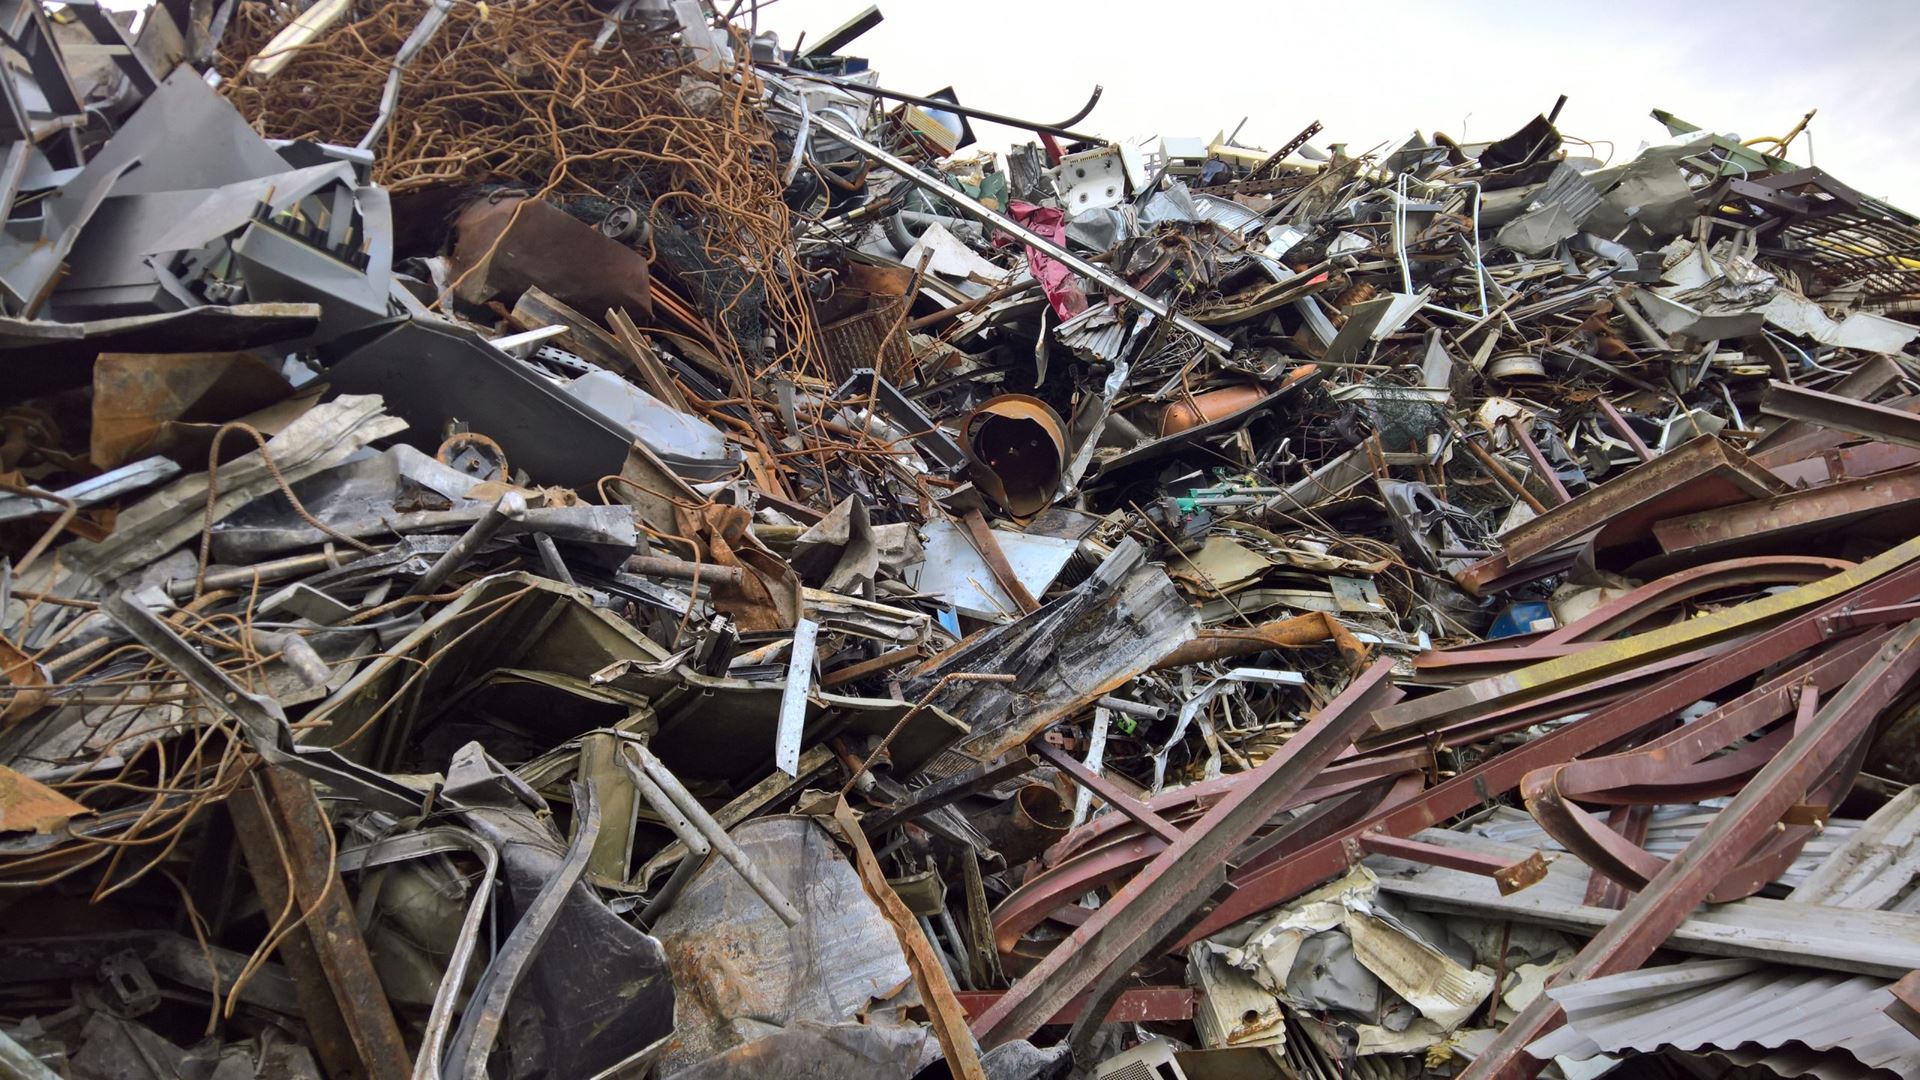 Germany's scrap metal imports and exports decreased